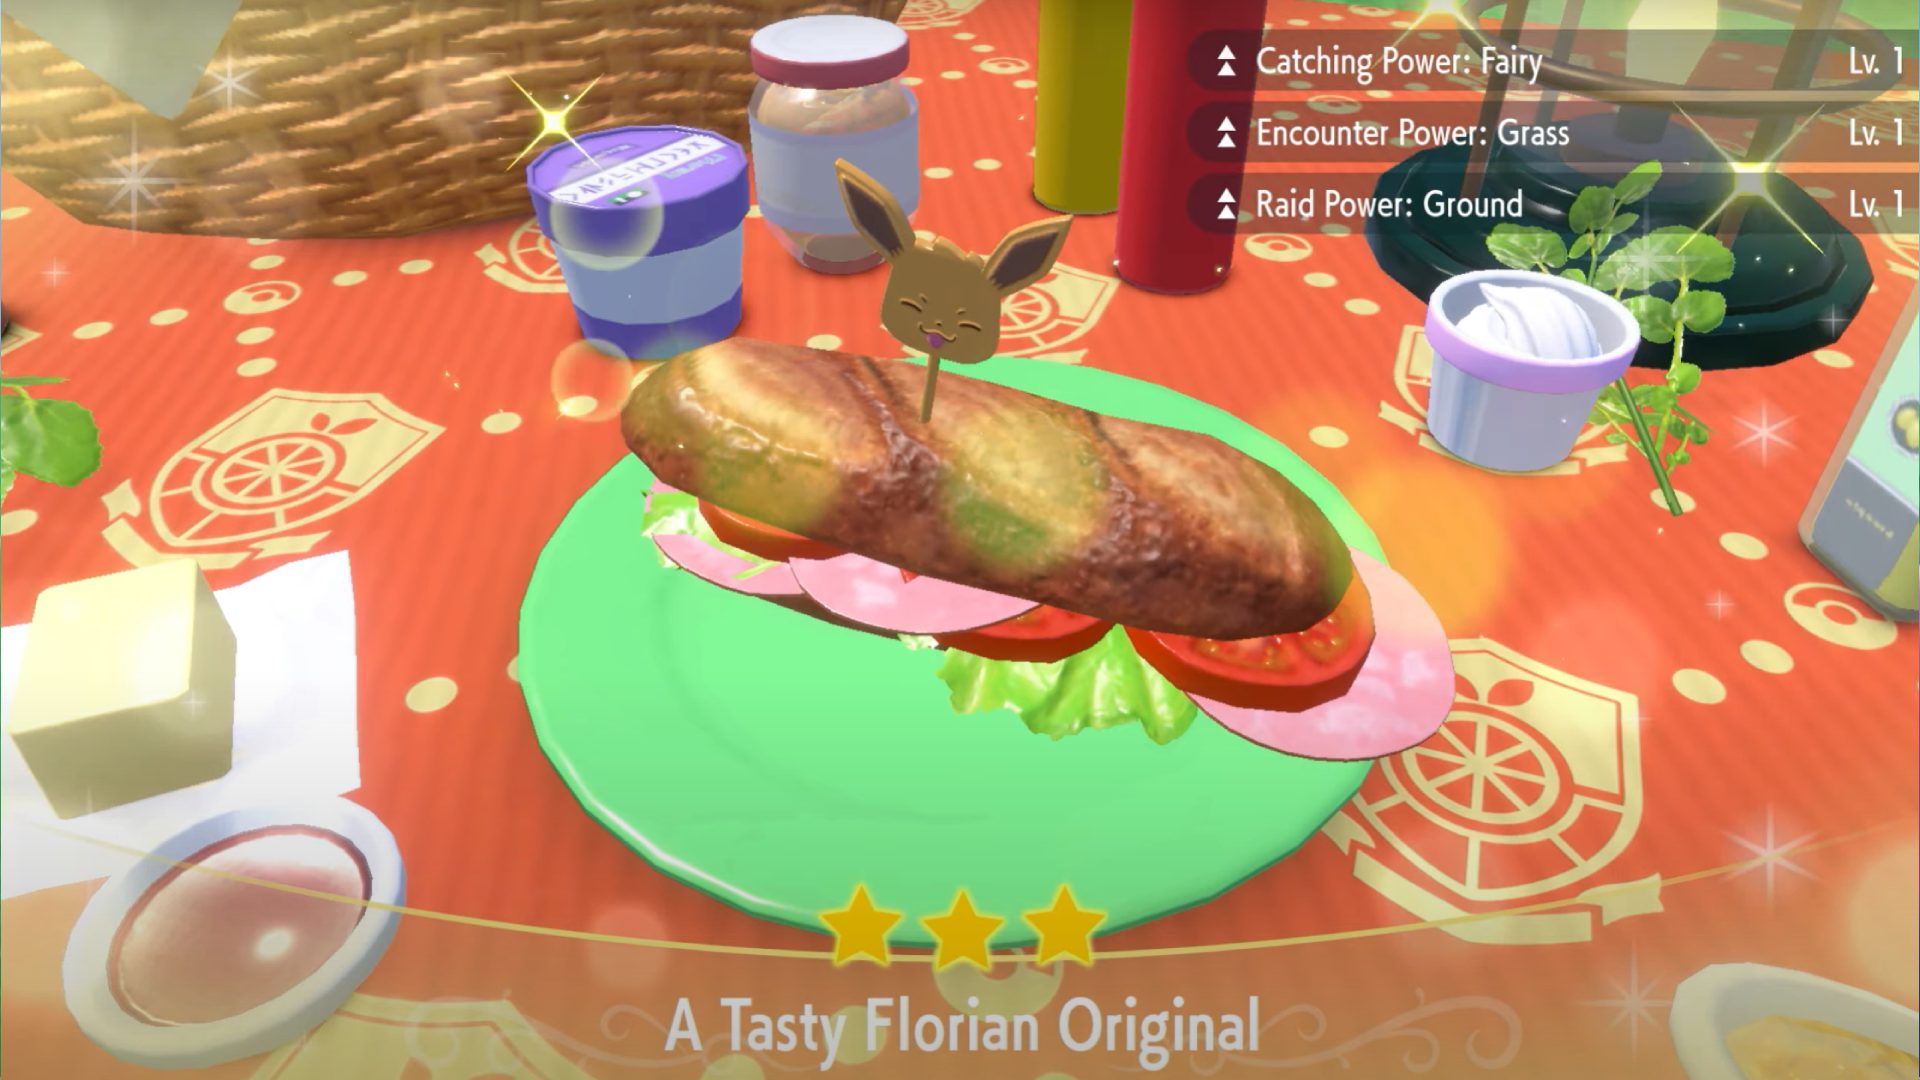 Pokemon Scarlet and VIolet picnics: a screenshot shows a sandwhich, with stats bisivble for the several boosts to abilties